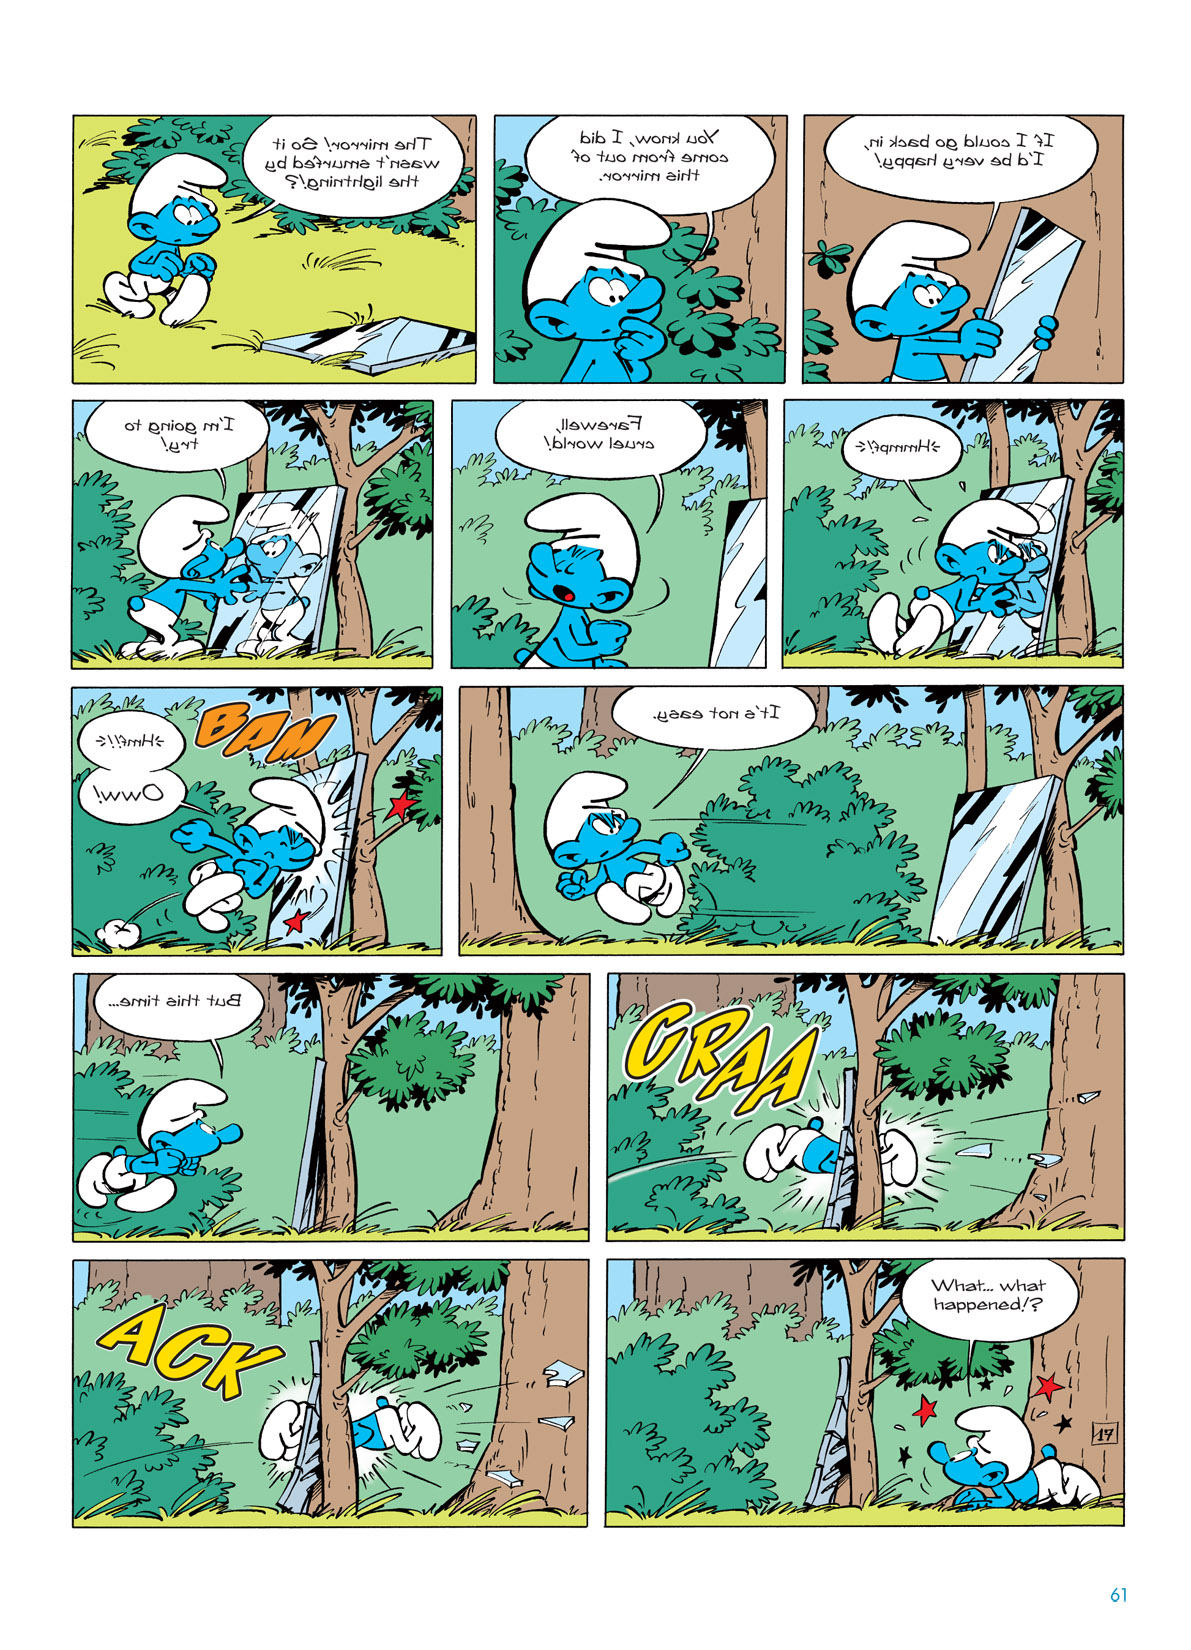 Read online The Smurfs comic -  Issue #5 - 61